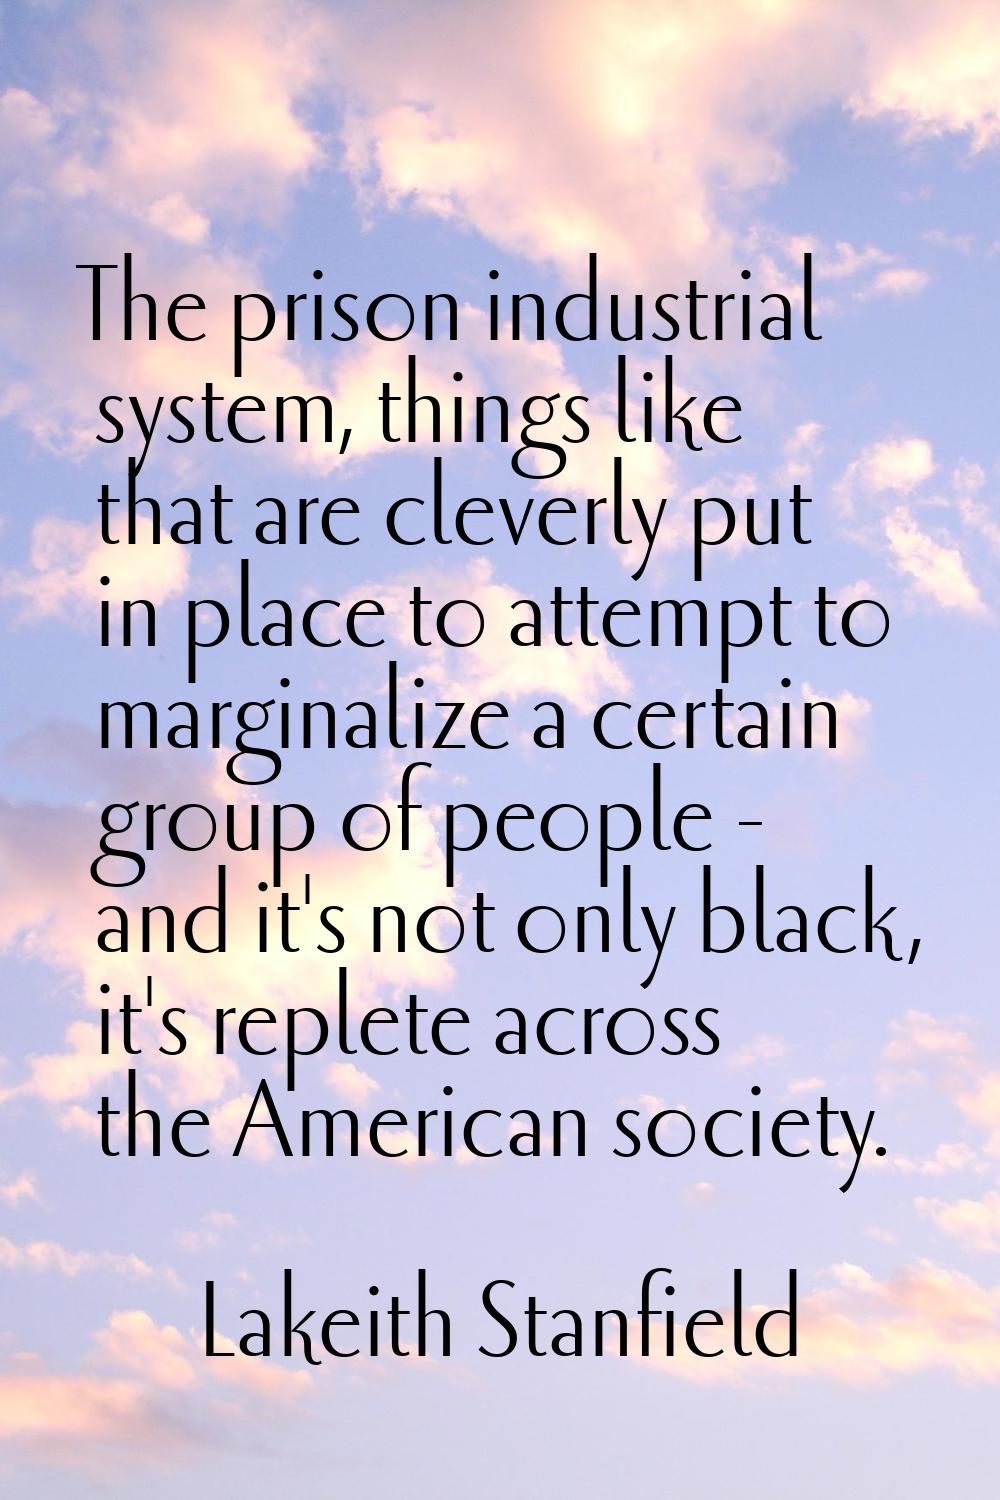 The prison industrial system, things like that are cleverly put in place to attempt to marginalize 